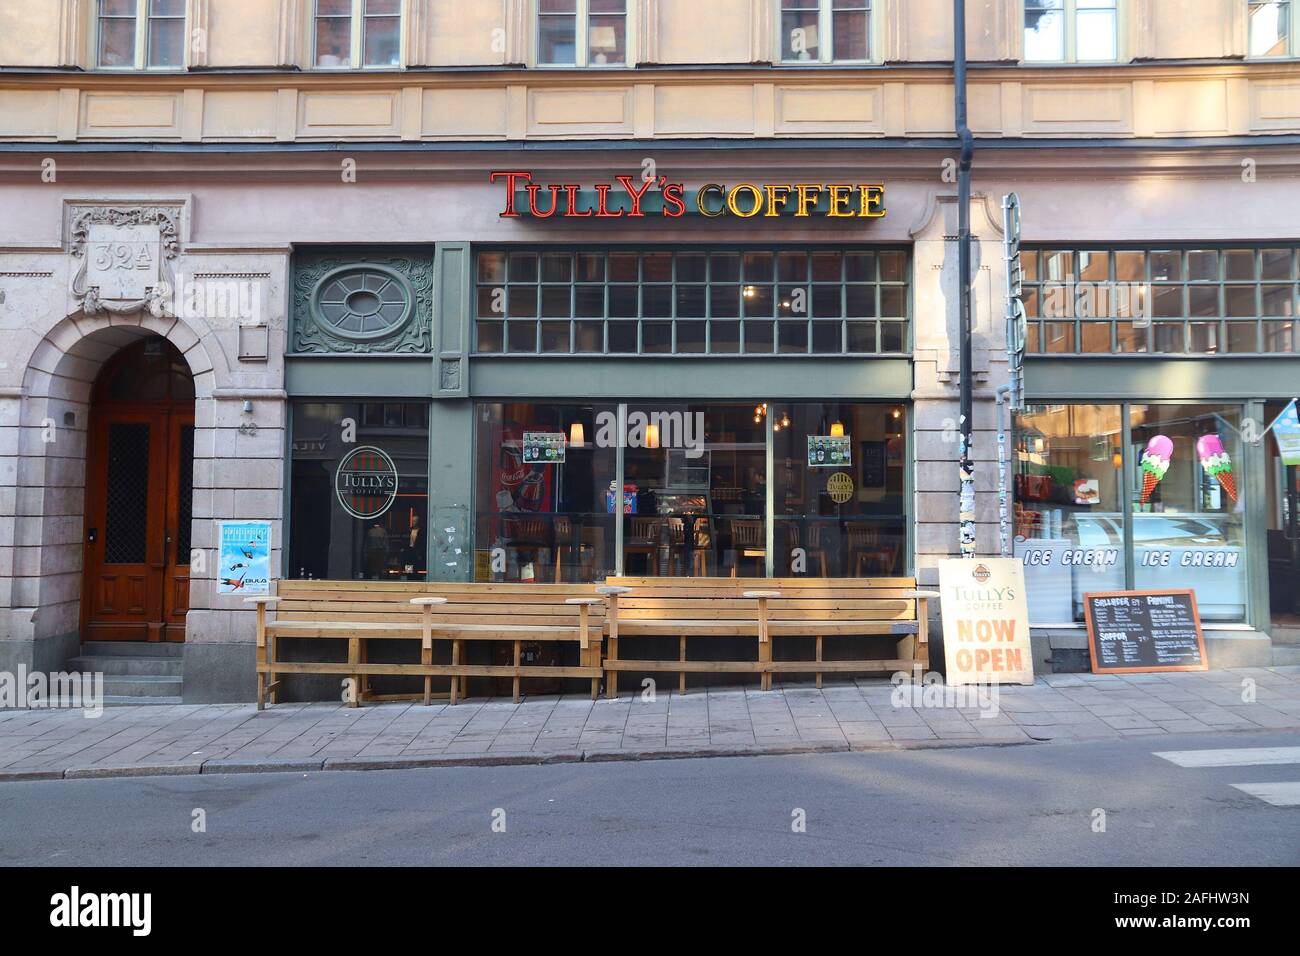 STOCKHOLM, SWEDEN - AUGUST 24, 2018: Tully's Coffee in Gotgatan street of Sodermalm district, Stockholm. Gotgatan is one of most recognizable streets Stock Photo